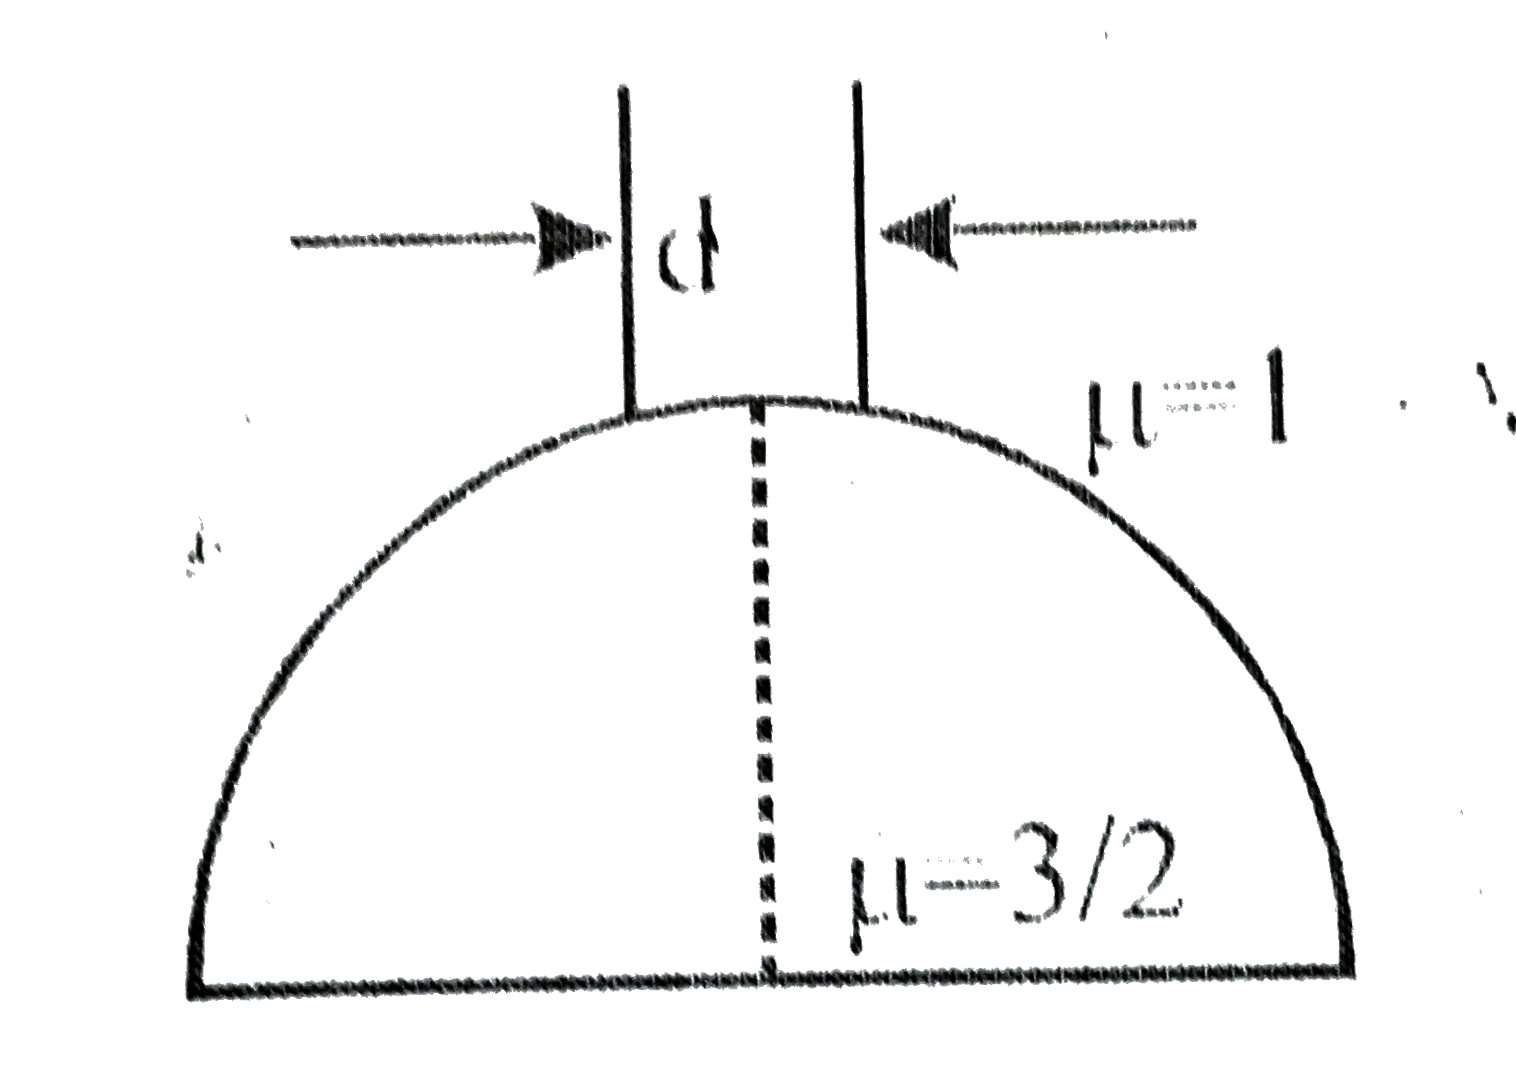 A beam of diameter 'd' is incident on a glass hemisphere as shown. If the radius of curvature of the hemisphere is very large in comparison to d, then the diameter of the beam at the base of the hemisphere will be :